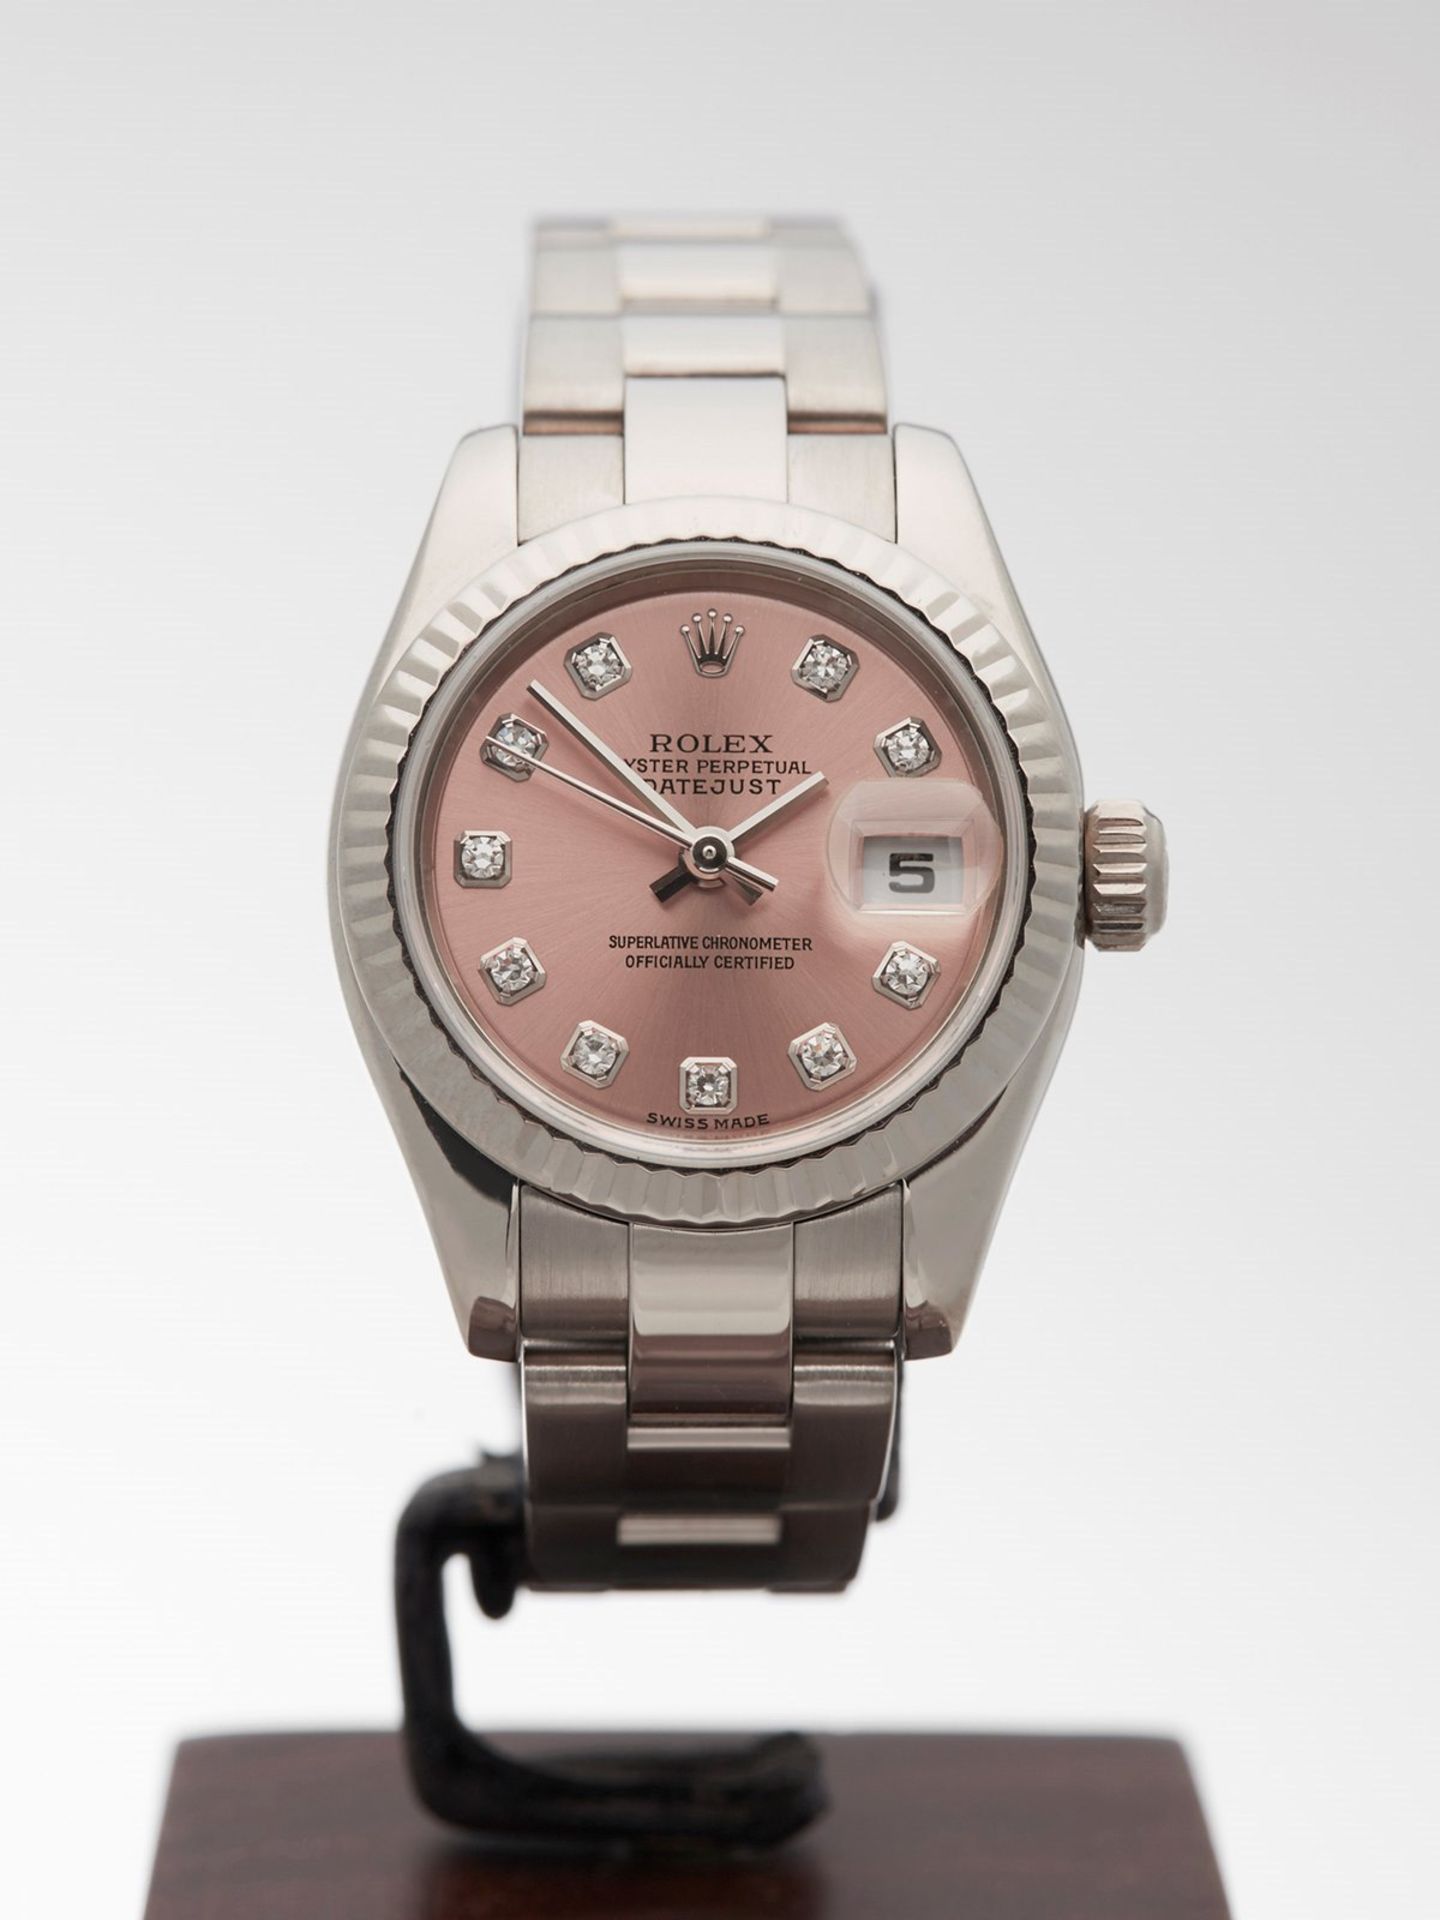 Rolex Datejust 26mm 18k White Gold 179179 - Image 2 of 9